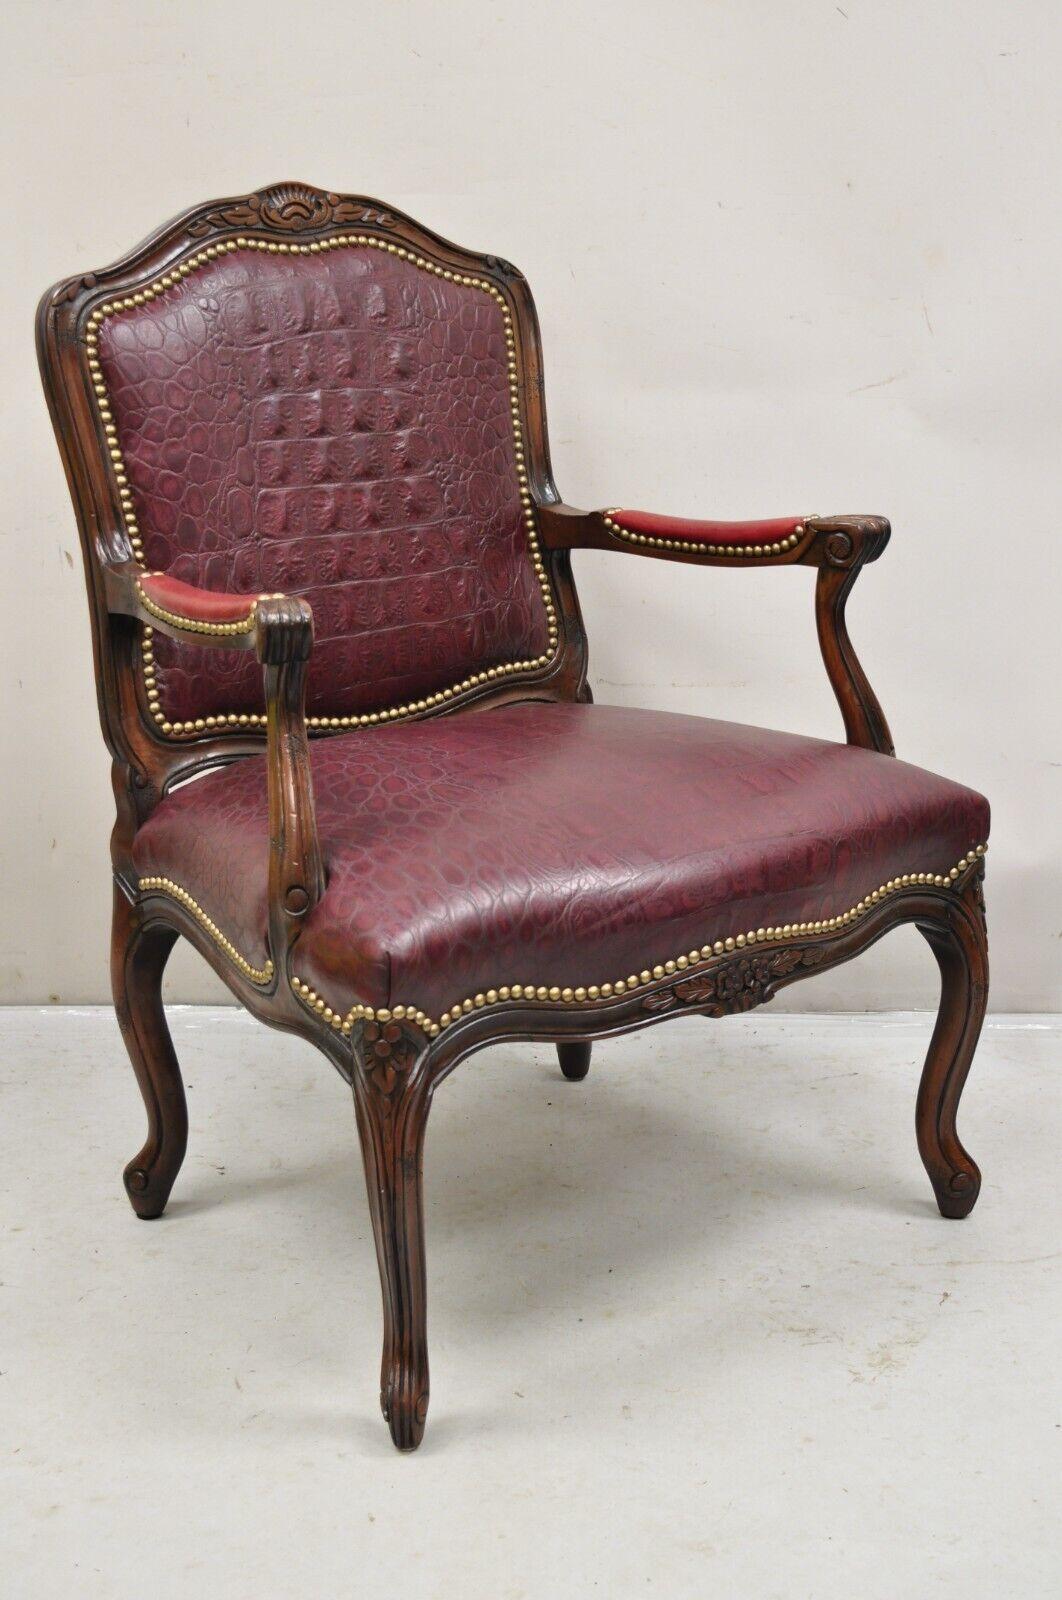 French Country Louis XV Style Burgundy Leather Faux Reptile Cowhide Armchair. Item features a distressed solid wood frame, burgundy leather embossed reptile print upholstery, brown cowhide upholstery to rear panel. Circa Late 20th Century.